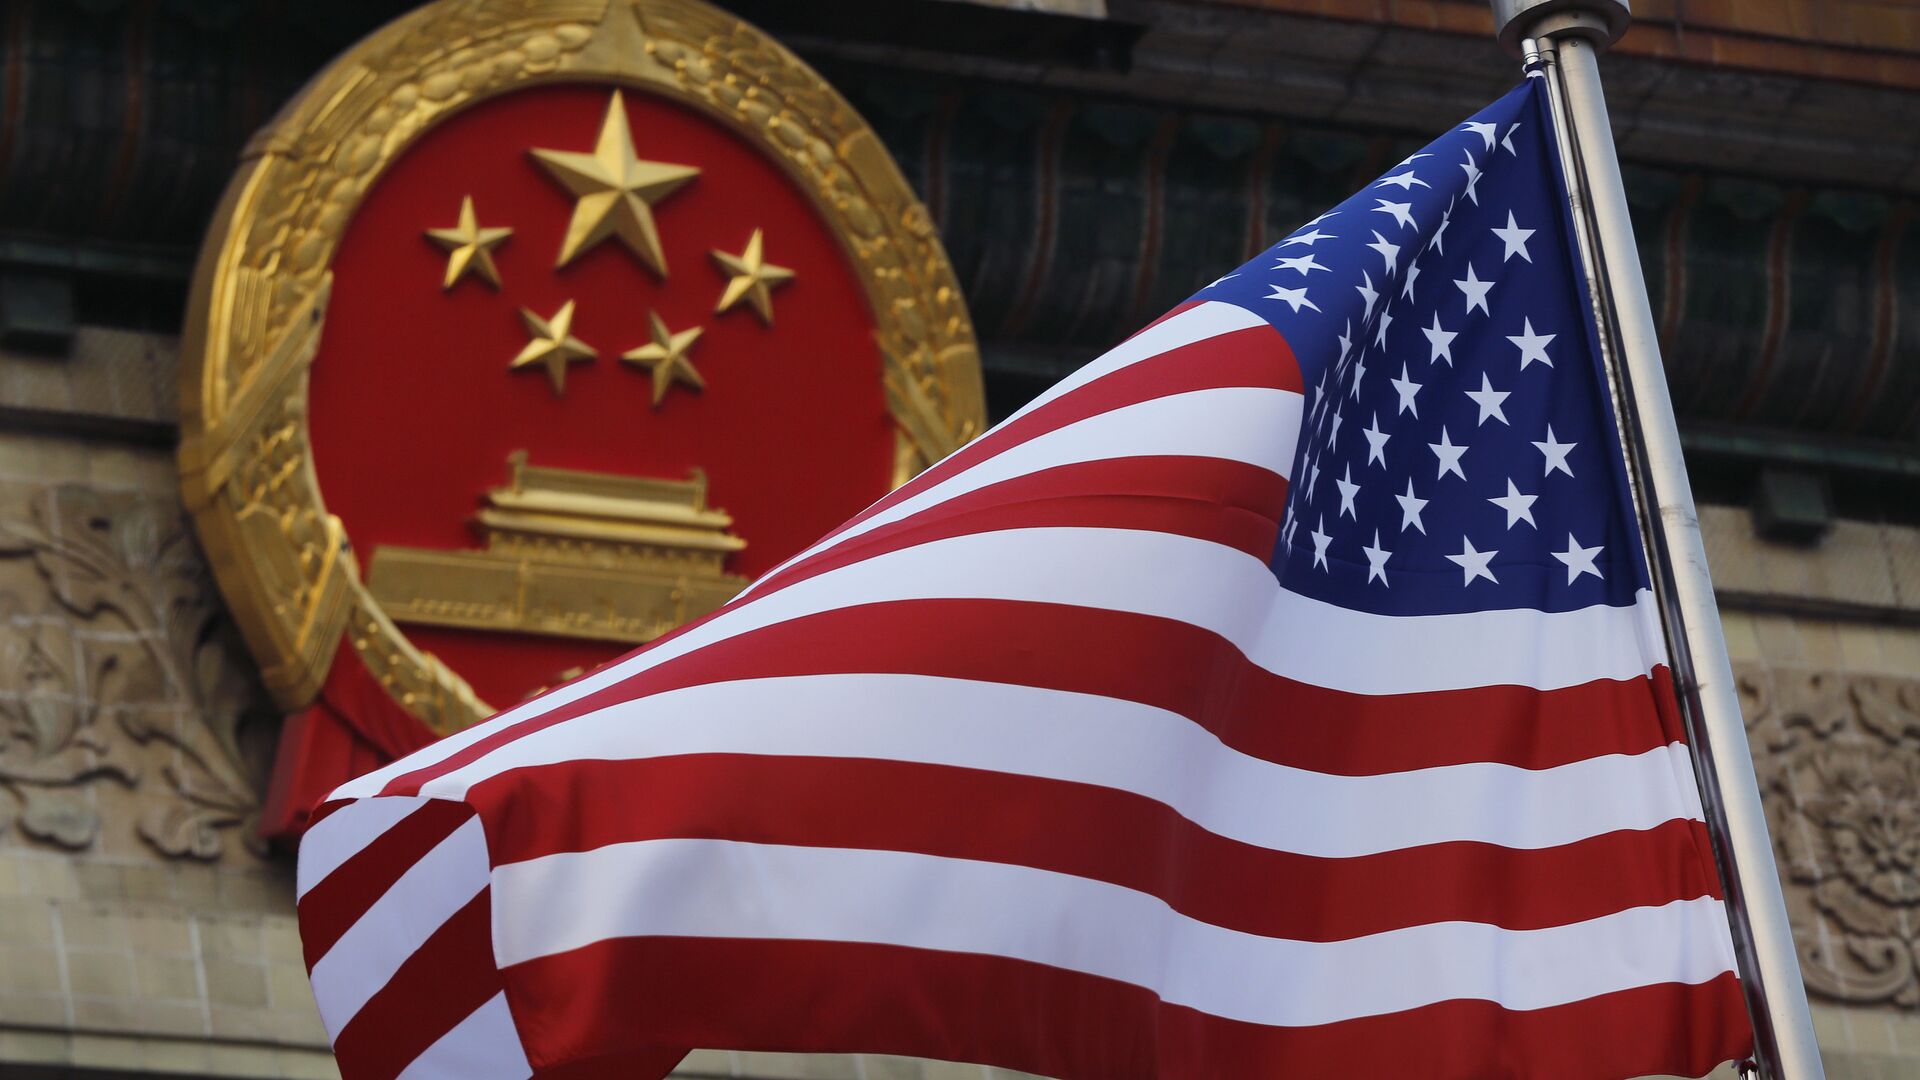 FILE - In this Nov. 9, 2017 file photo, an American flag is flown next to the Chinese national emblem during a welcome ceremony for visiting U.S. President Donald Trump outside the Great Hall of the People in Beijing - Sputnik International, 1920, 03.08.2022